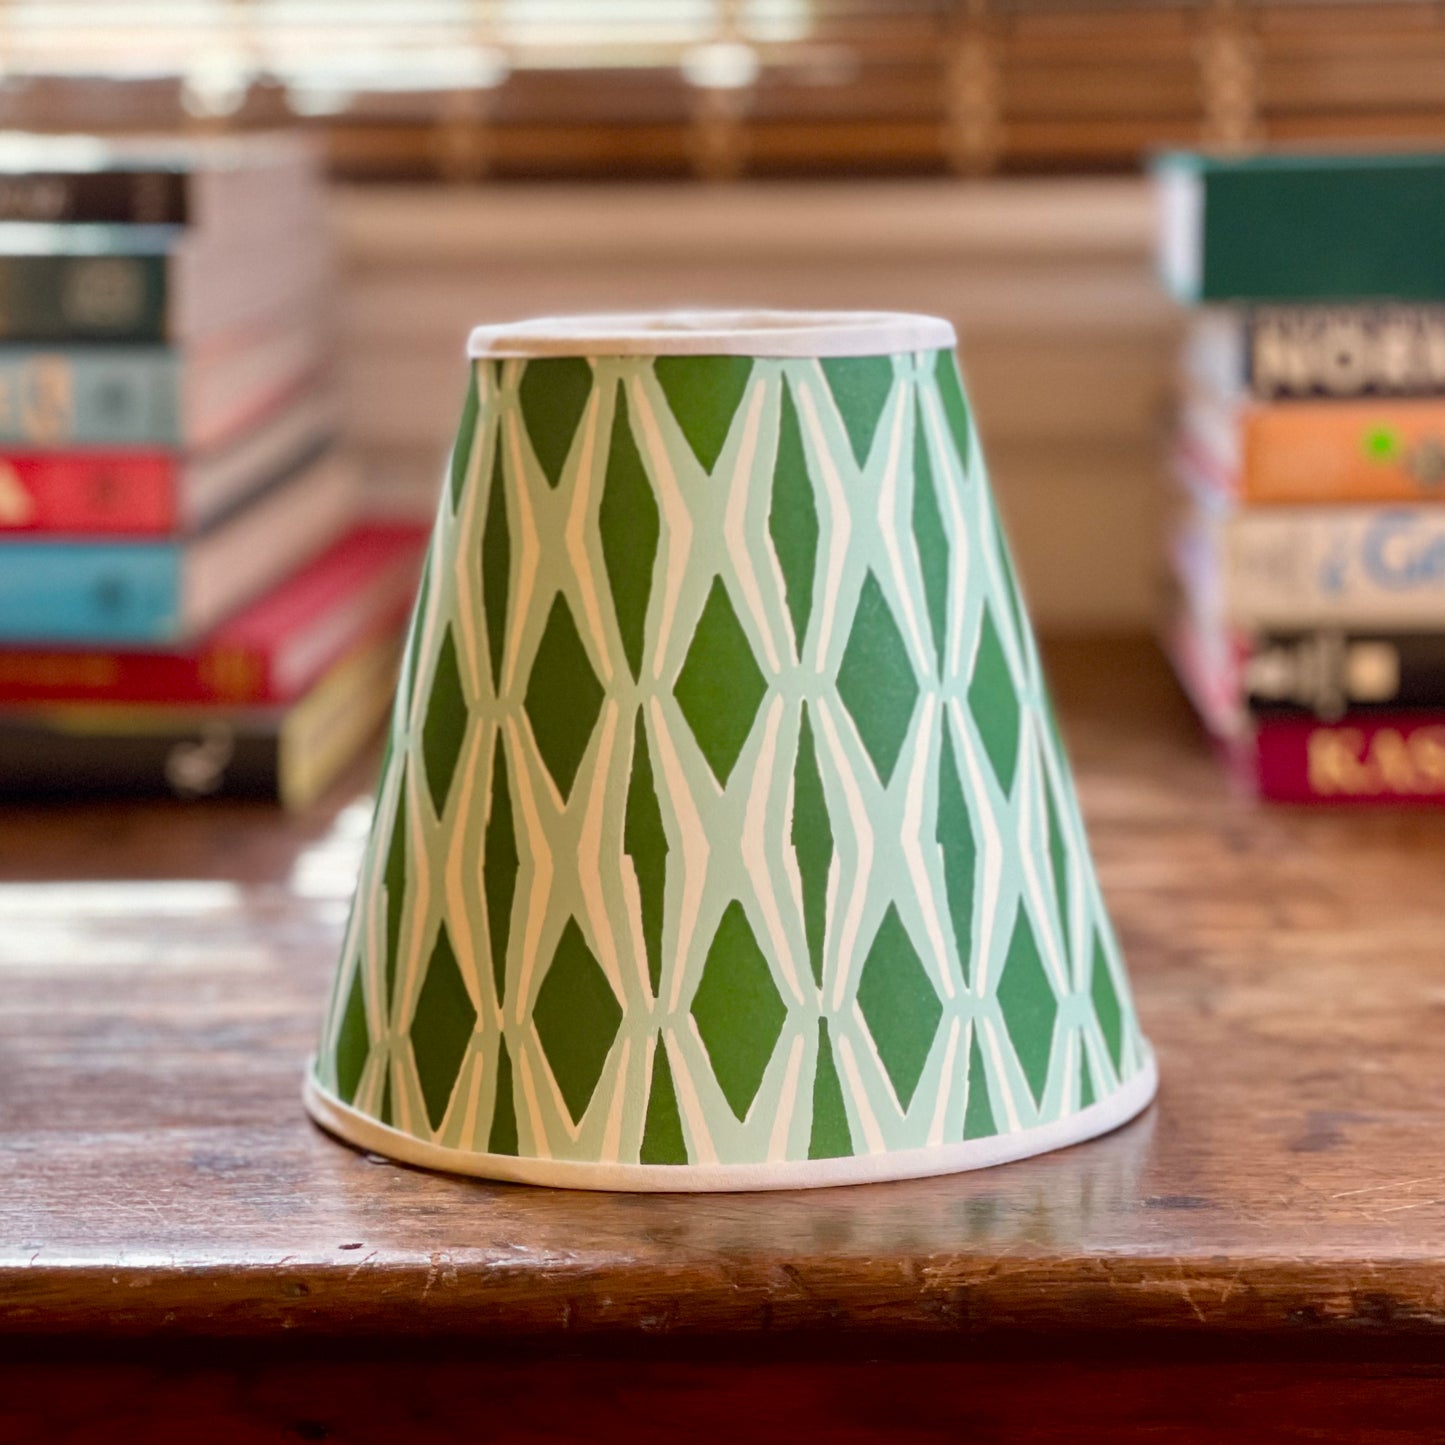 Small Clip-On Lampshade. Patterned Paper from England. "Smocking" Jade and Forest Green. White Trim.